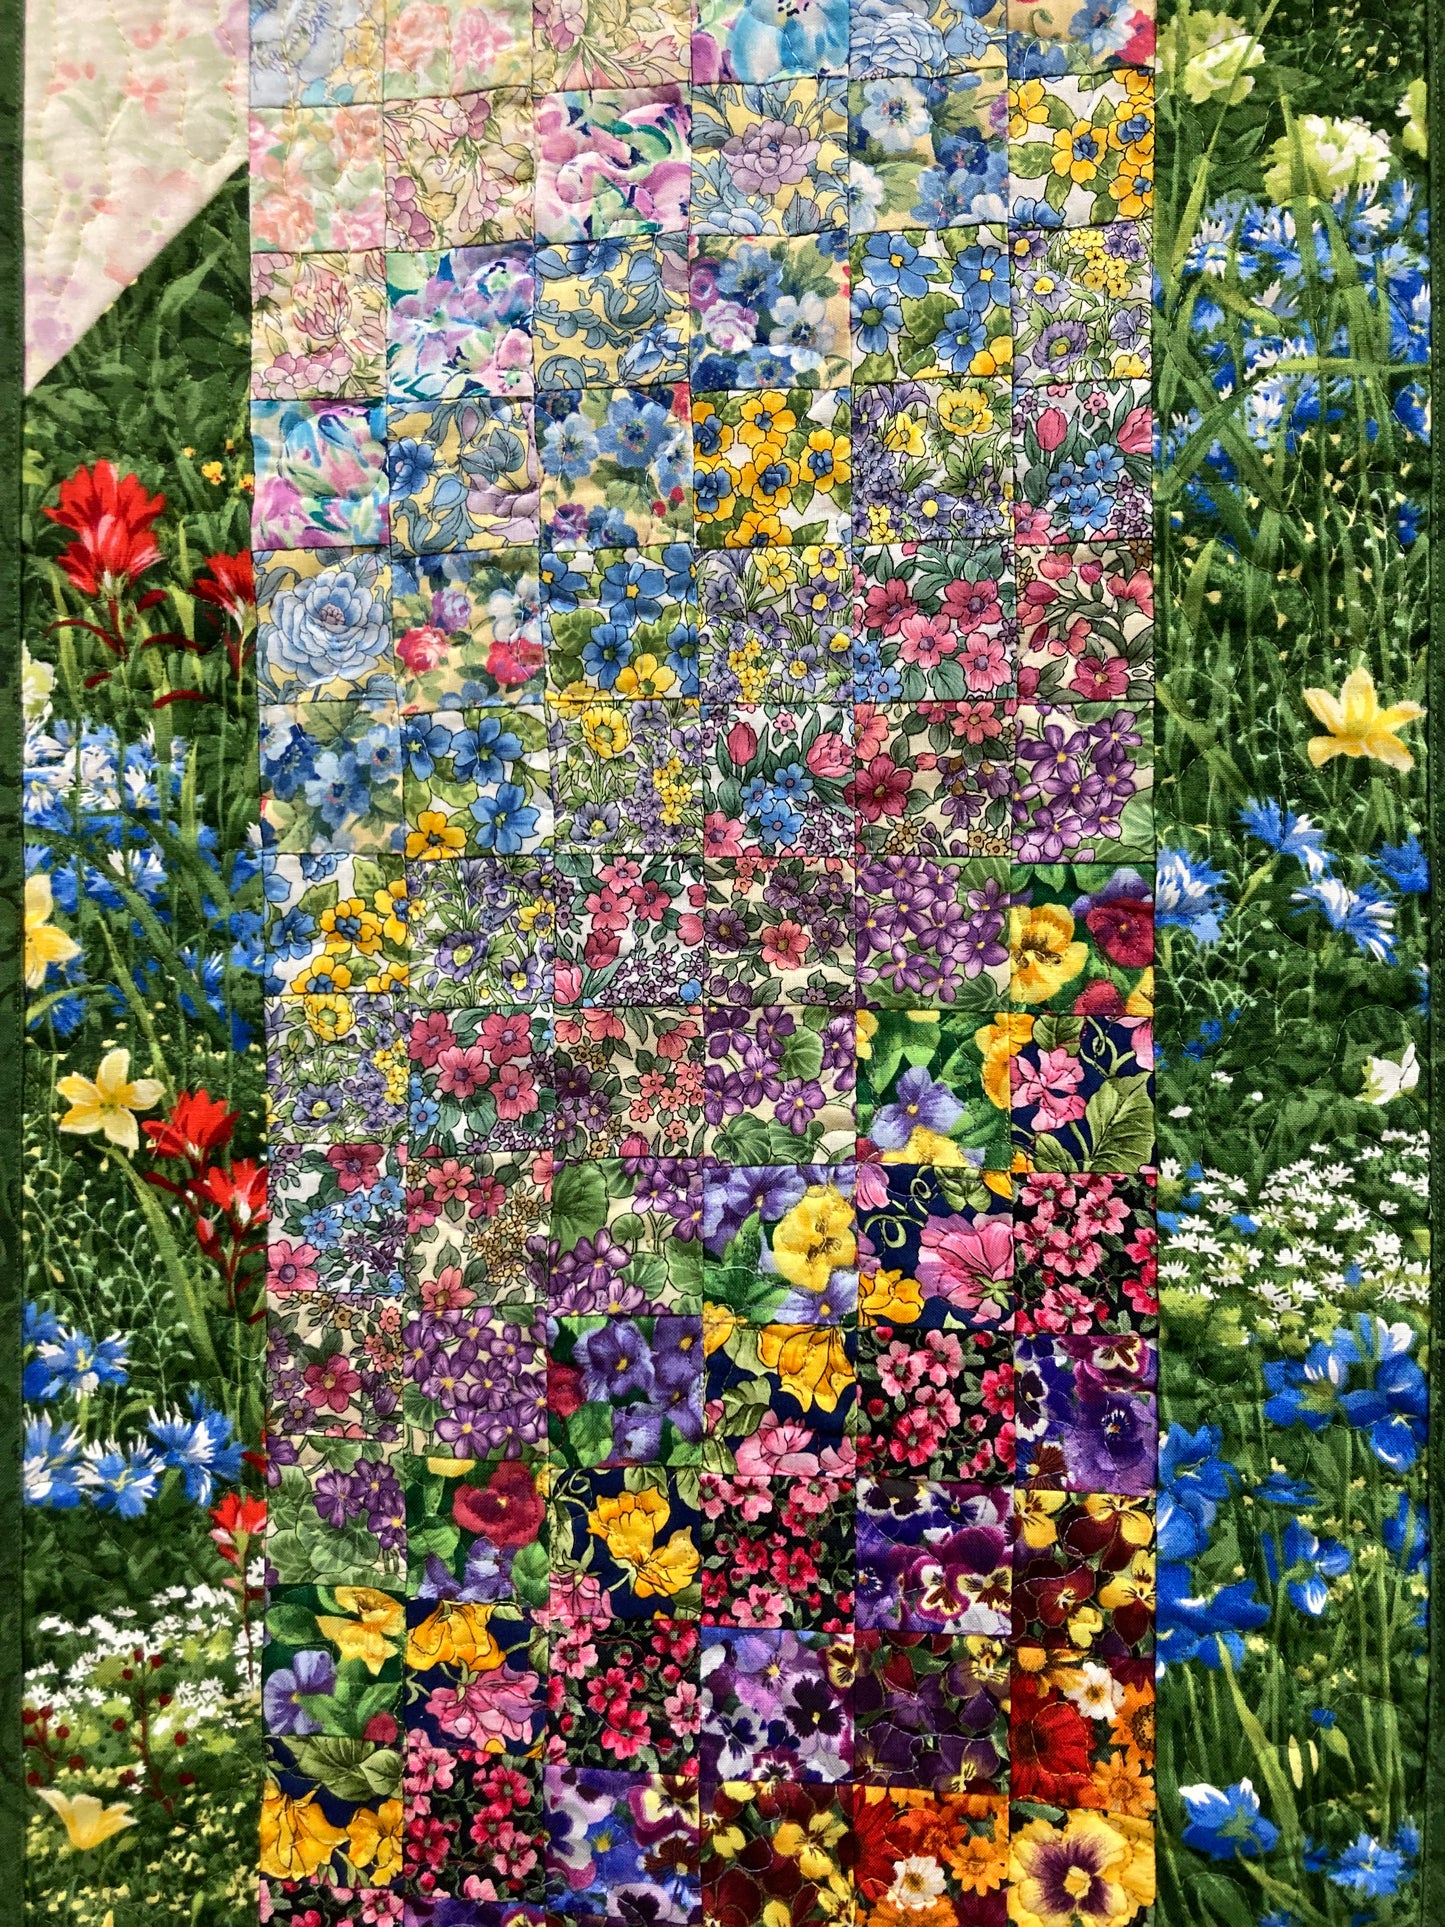 Art Quilt, Summer Flowers Sunny Garden Fabric Wall Hanging 14x38” Bedroom Living Room, Textile Watercolor Tapestry, Vertical Quilted